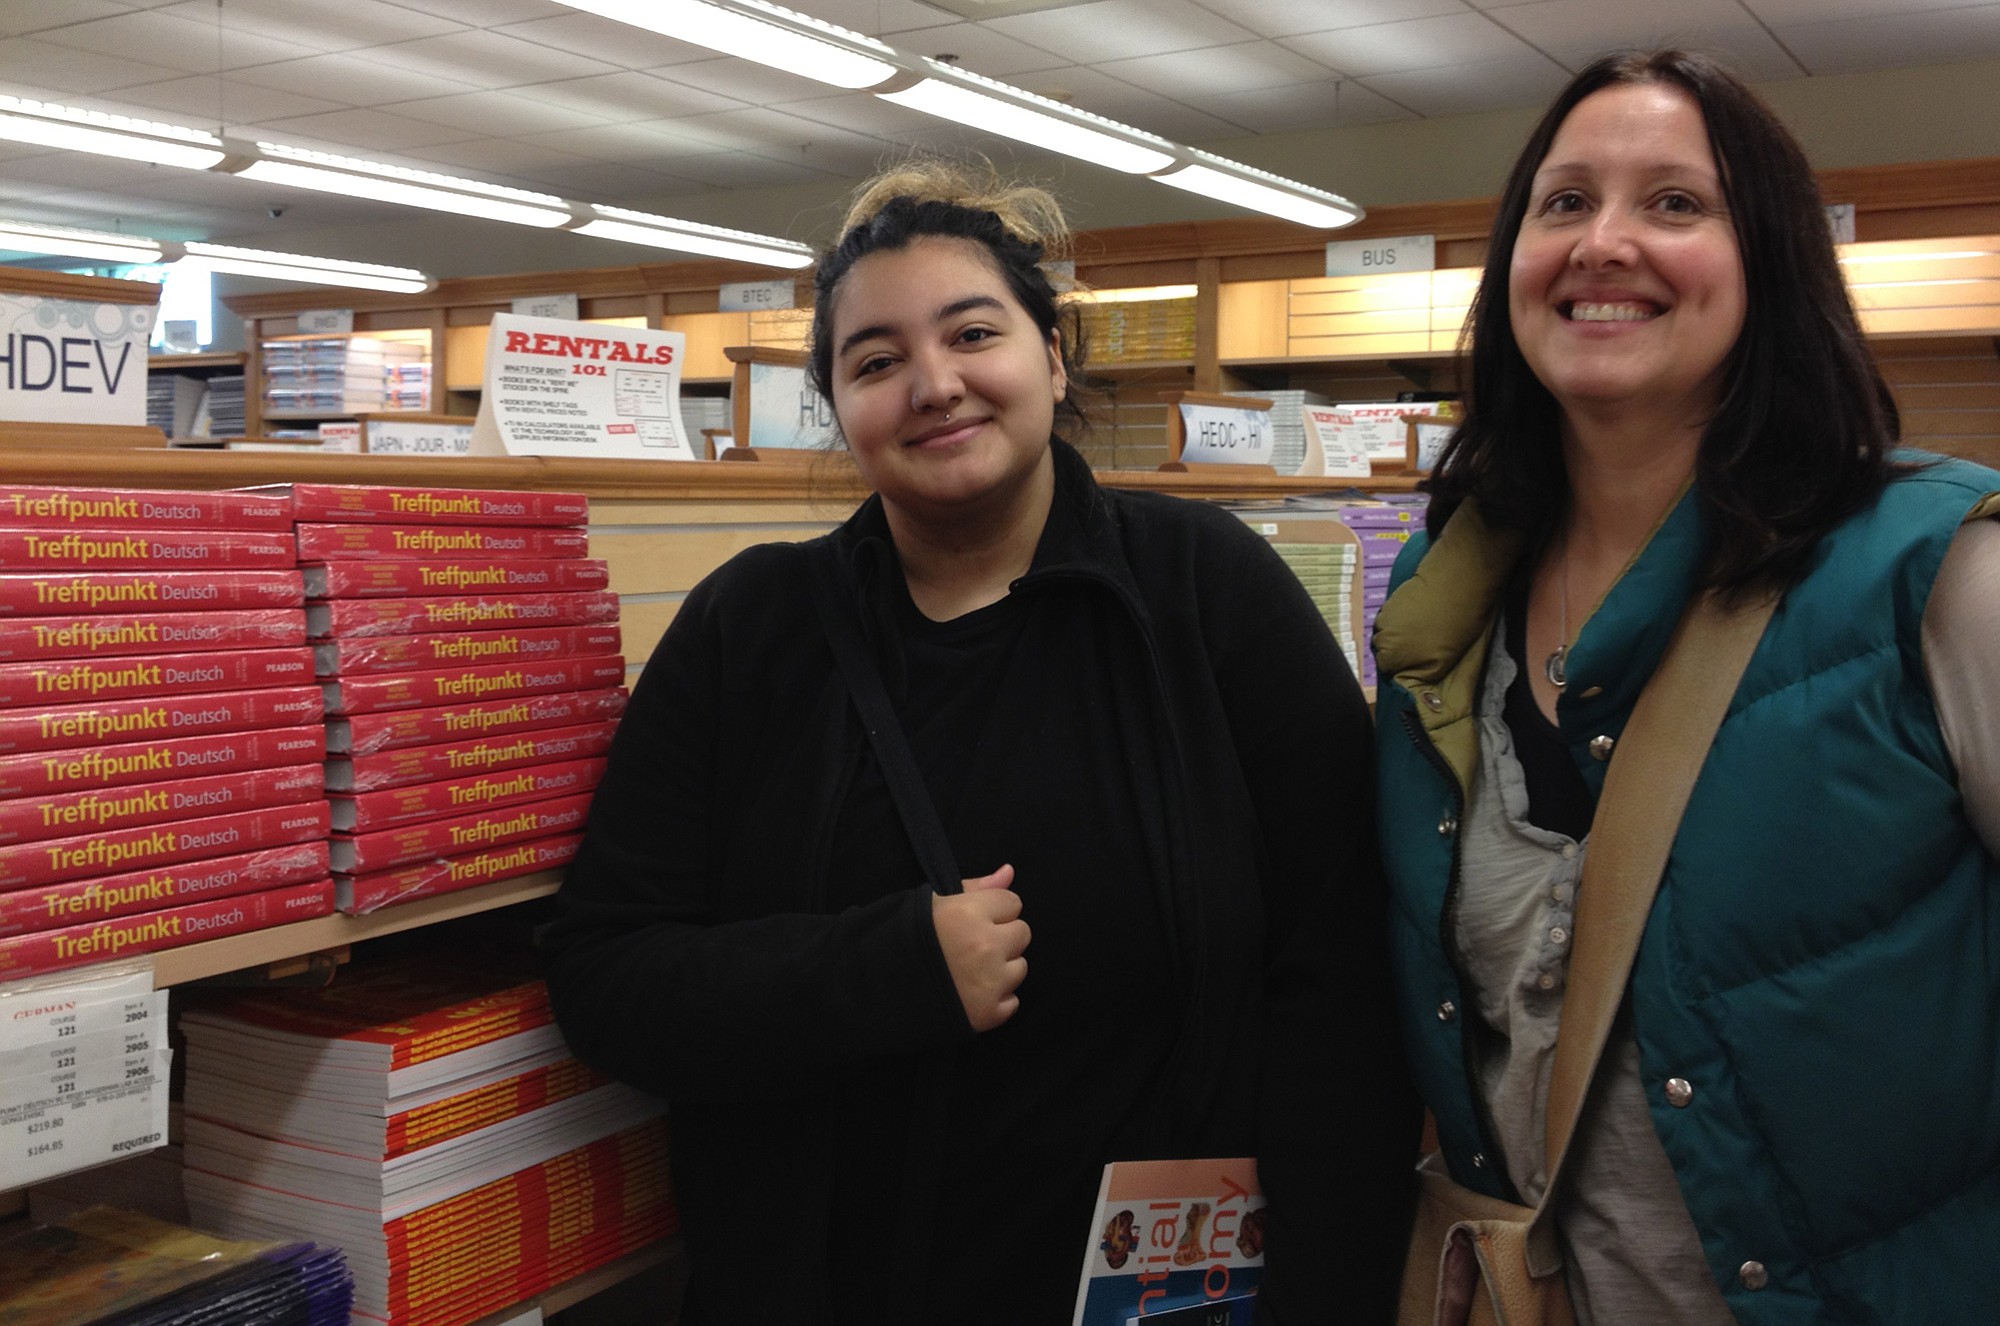 Jemma Gonzales,18, Clark College student and her mom, Brynn Gonzales check out textbook prices in the Clark College Bookstore. The textbook required for Jemma Gonzales' German class came with a hefty sticker price: $219.80. No used books remained on the shelf.